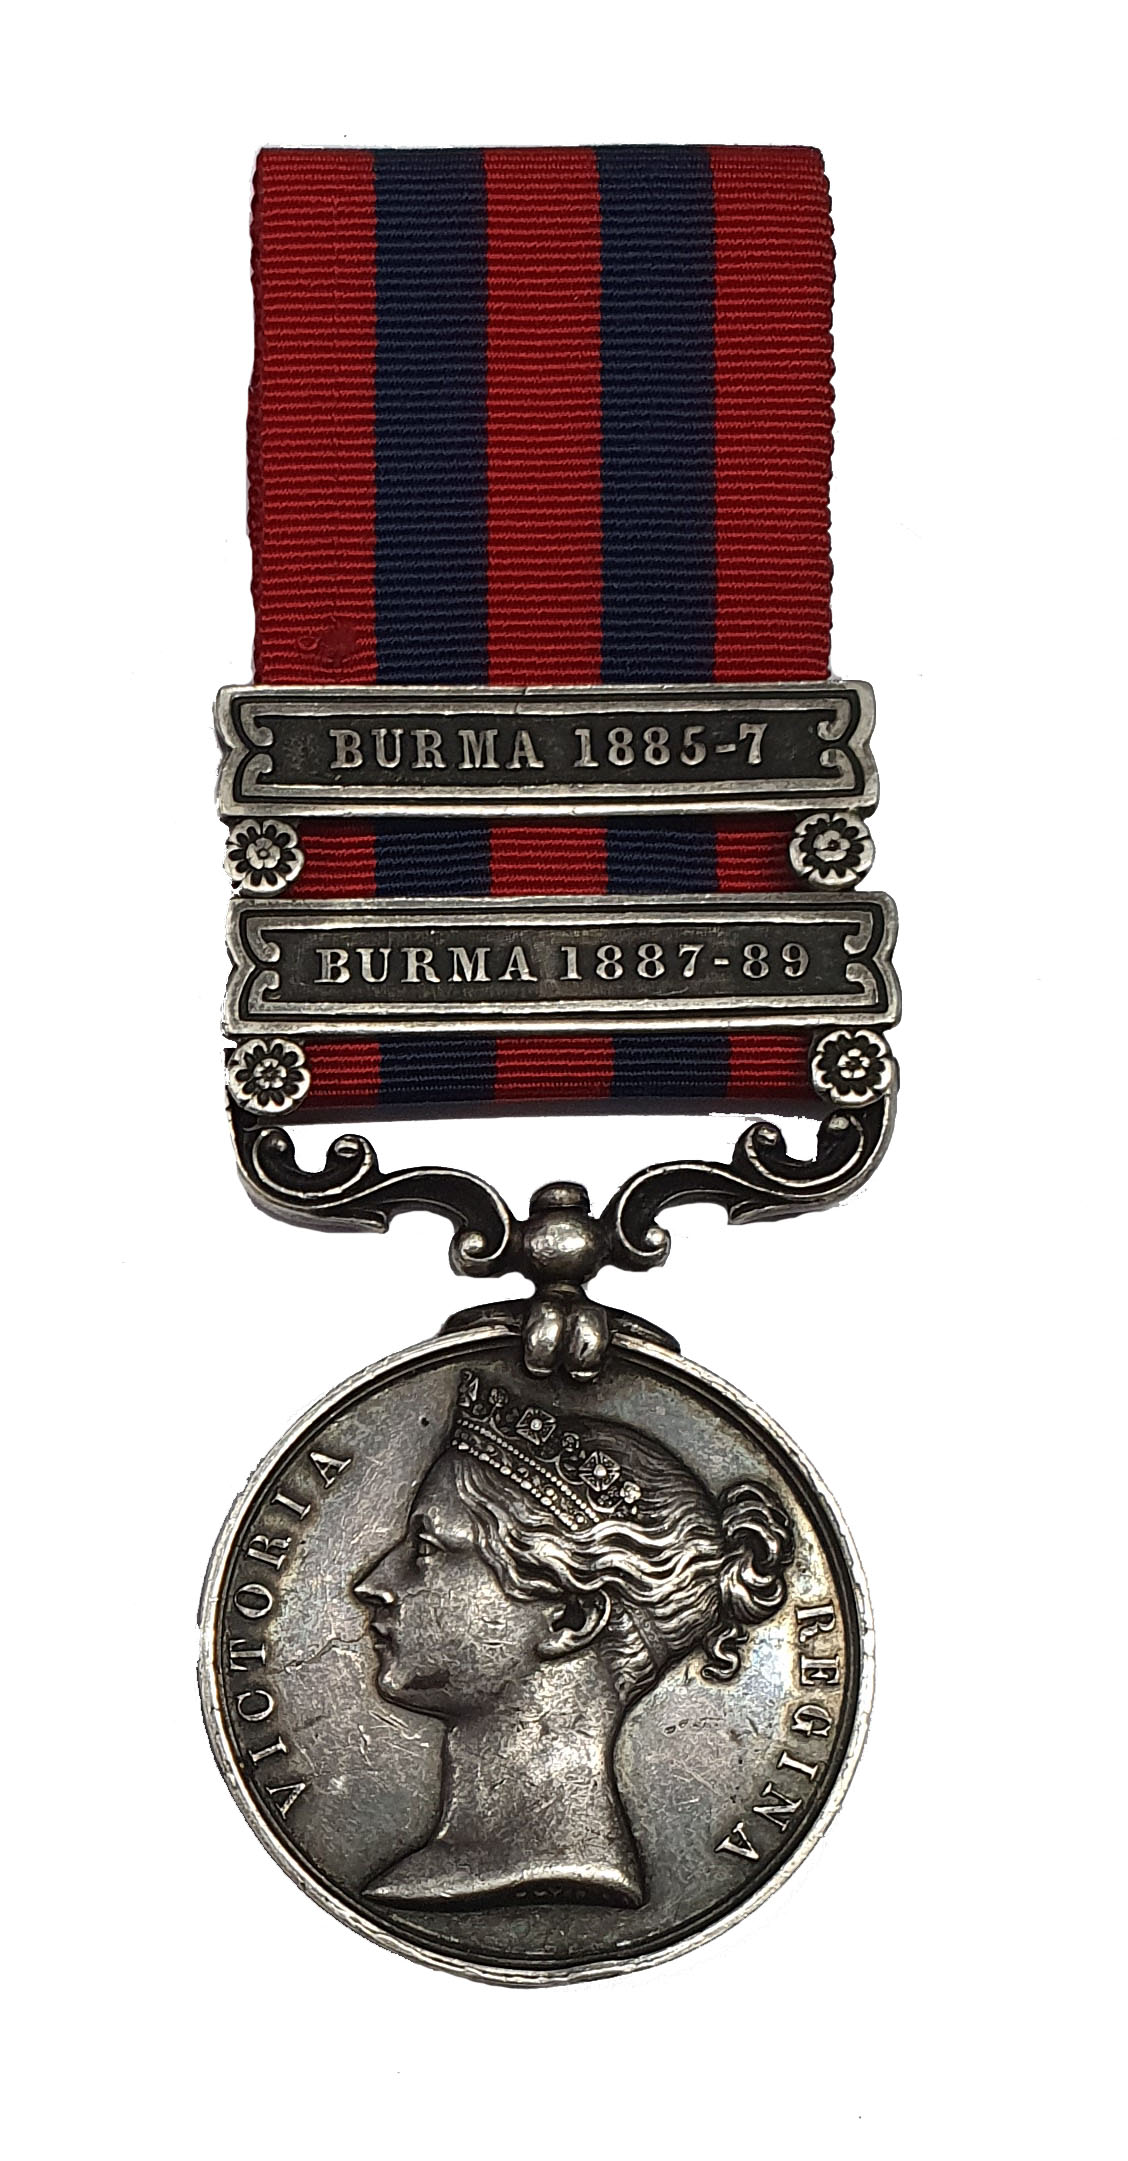 India General Service Medal, 1854-95, two clasps, Burma 1887-89, Burma 1885-7 awarded to 339 Pte E. Makin